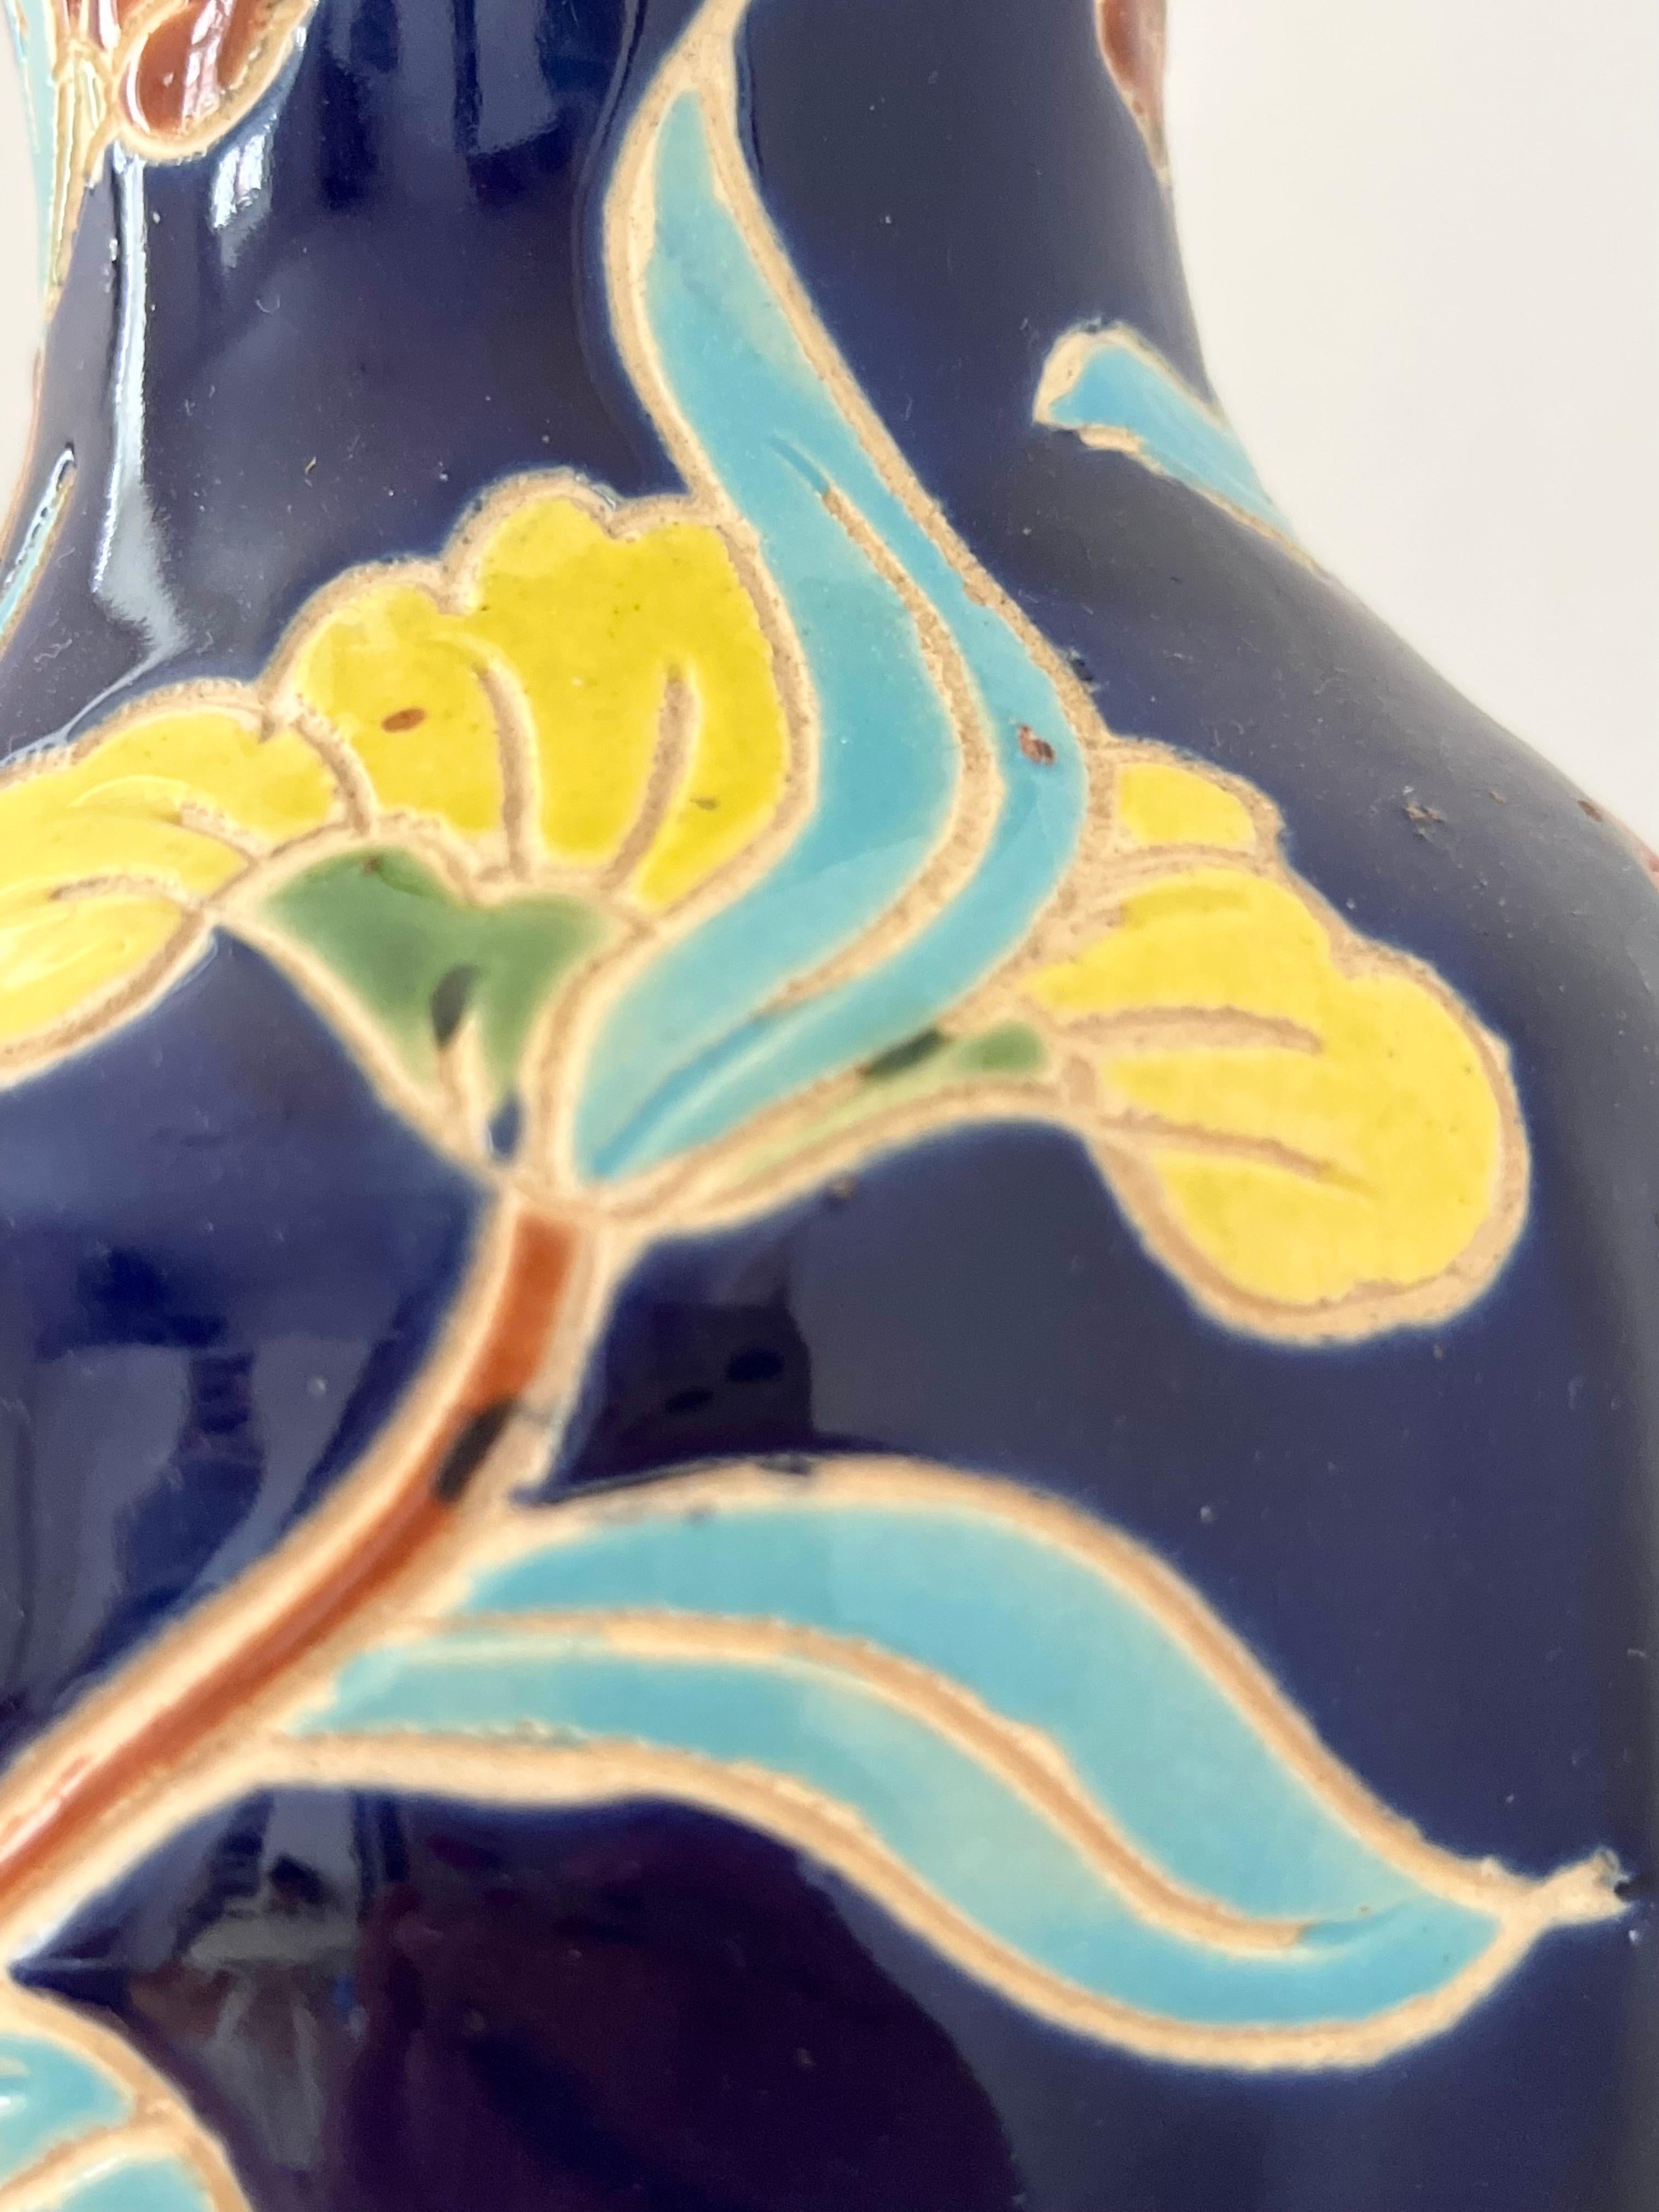 1960s/1970s Scandinavian Organic Modern Ceramic Vase with Colorful Floral Motifs For Sale 11